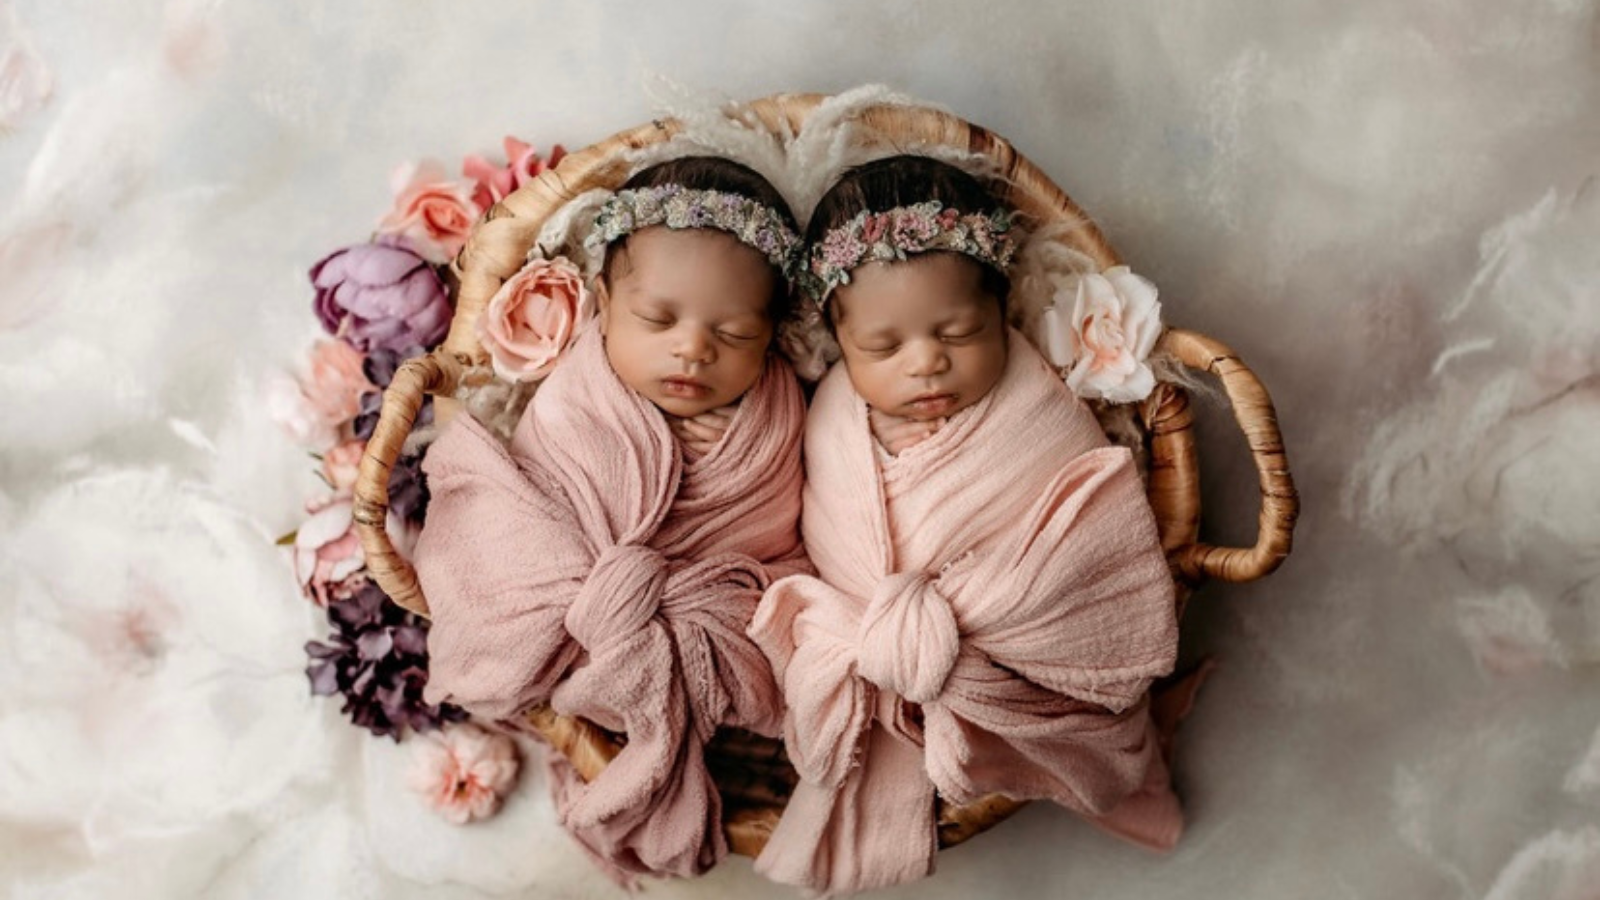 Our Journey to IVF Identical Twins | Christa & Aland's Story